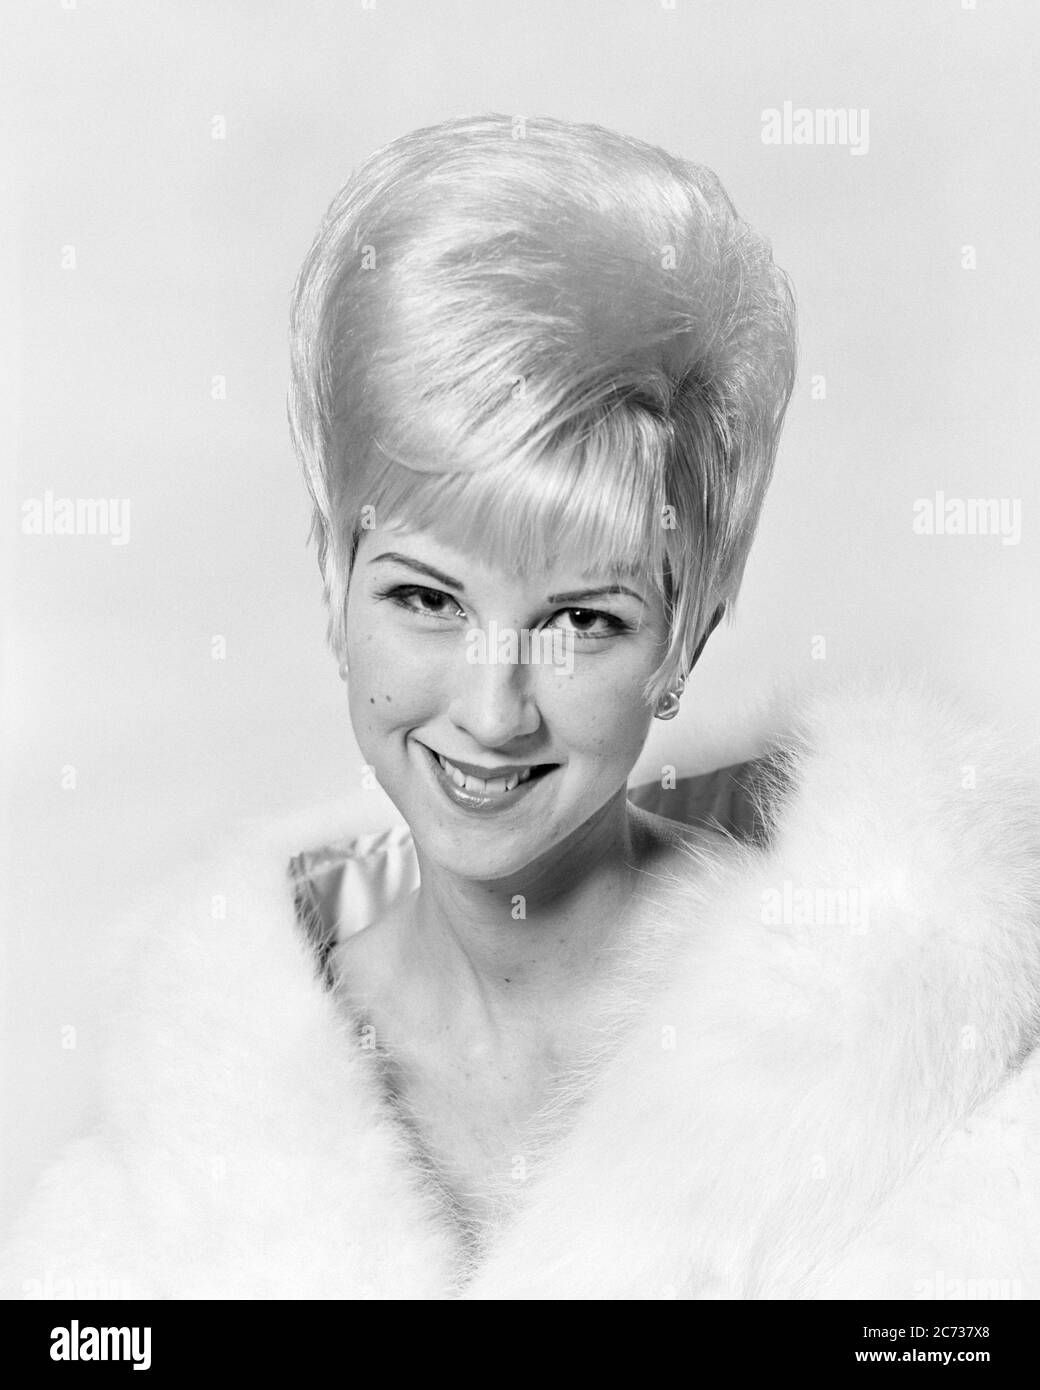 1960s PORTRAIT SMILING BLONDE WOMAN BOUFFANT HAIRDO WEARING WHITE FUR STOLE LOOKING AT CAMERA - asp jo7403 ASP001 HARS CHARM B&W BEEHIVE EYE CONTACT HAPPINESS HEAD AND SHOULDERS STYLES SOPHISTICATED HAIRSTYLE ALLURE SMILES STOLE WHITE FUR JOYFUL STYLISH CHIC FASHIONS GLAMOROUS HAIRDO MID-ADULT MID-ADULT WOMAN TEASED YOUNG ADULT WOMAN BLACK AND WHITE BOUFFANT CAUCASIAN ETHNICITY GLAM MYSTIQUE OLD FASHIONED Stock Photo